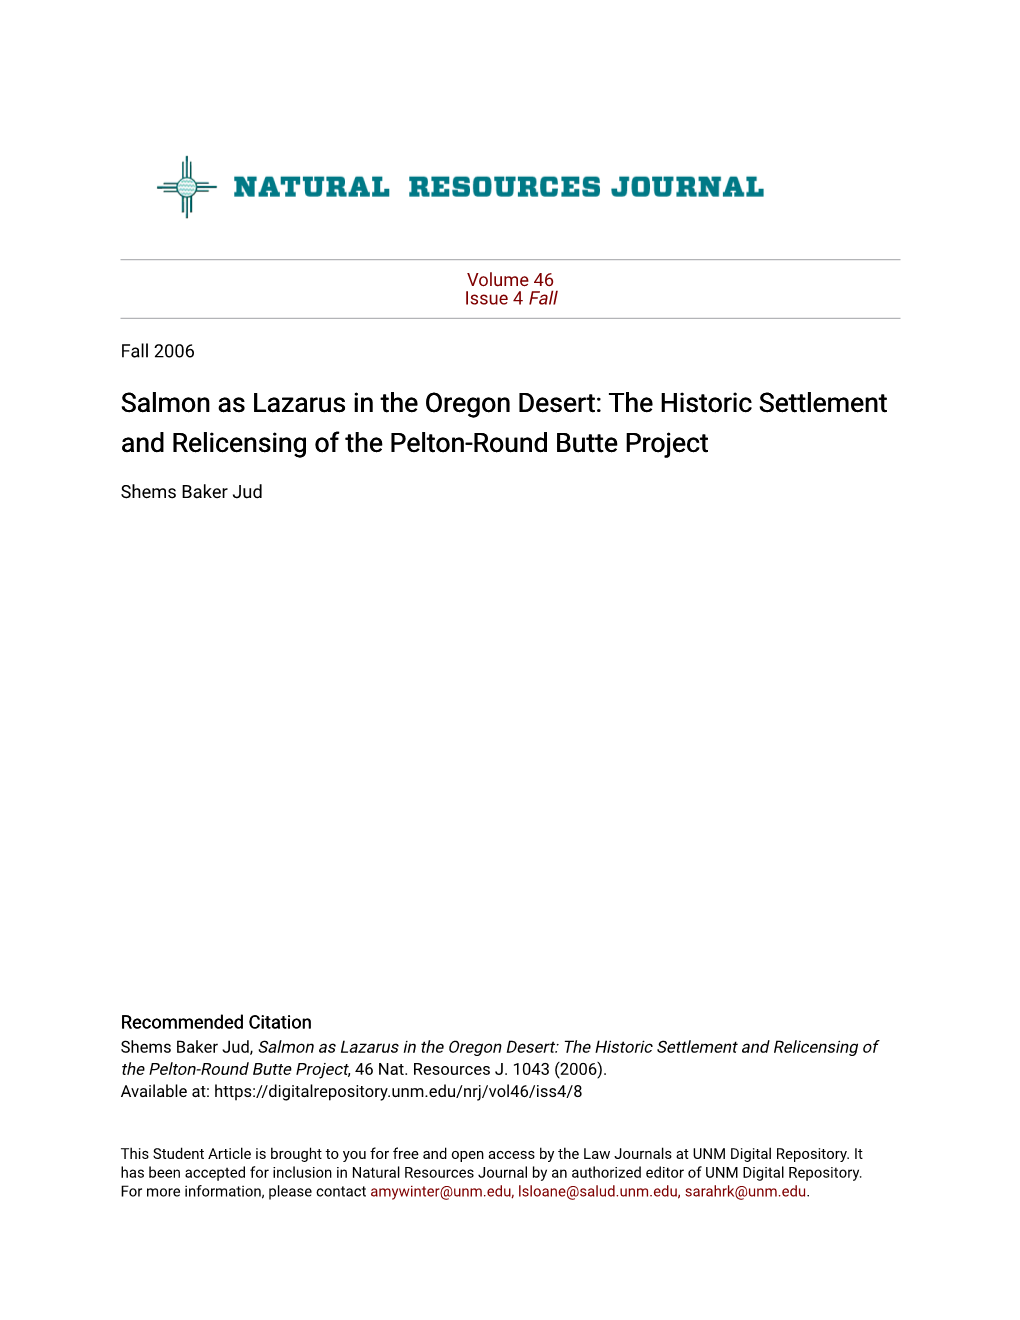 Salmon As Lazarus in the Oregon Desert: the Historic Settlement and Relicensing of the Pelton-Round Butte Project